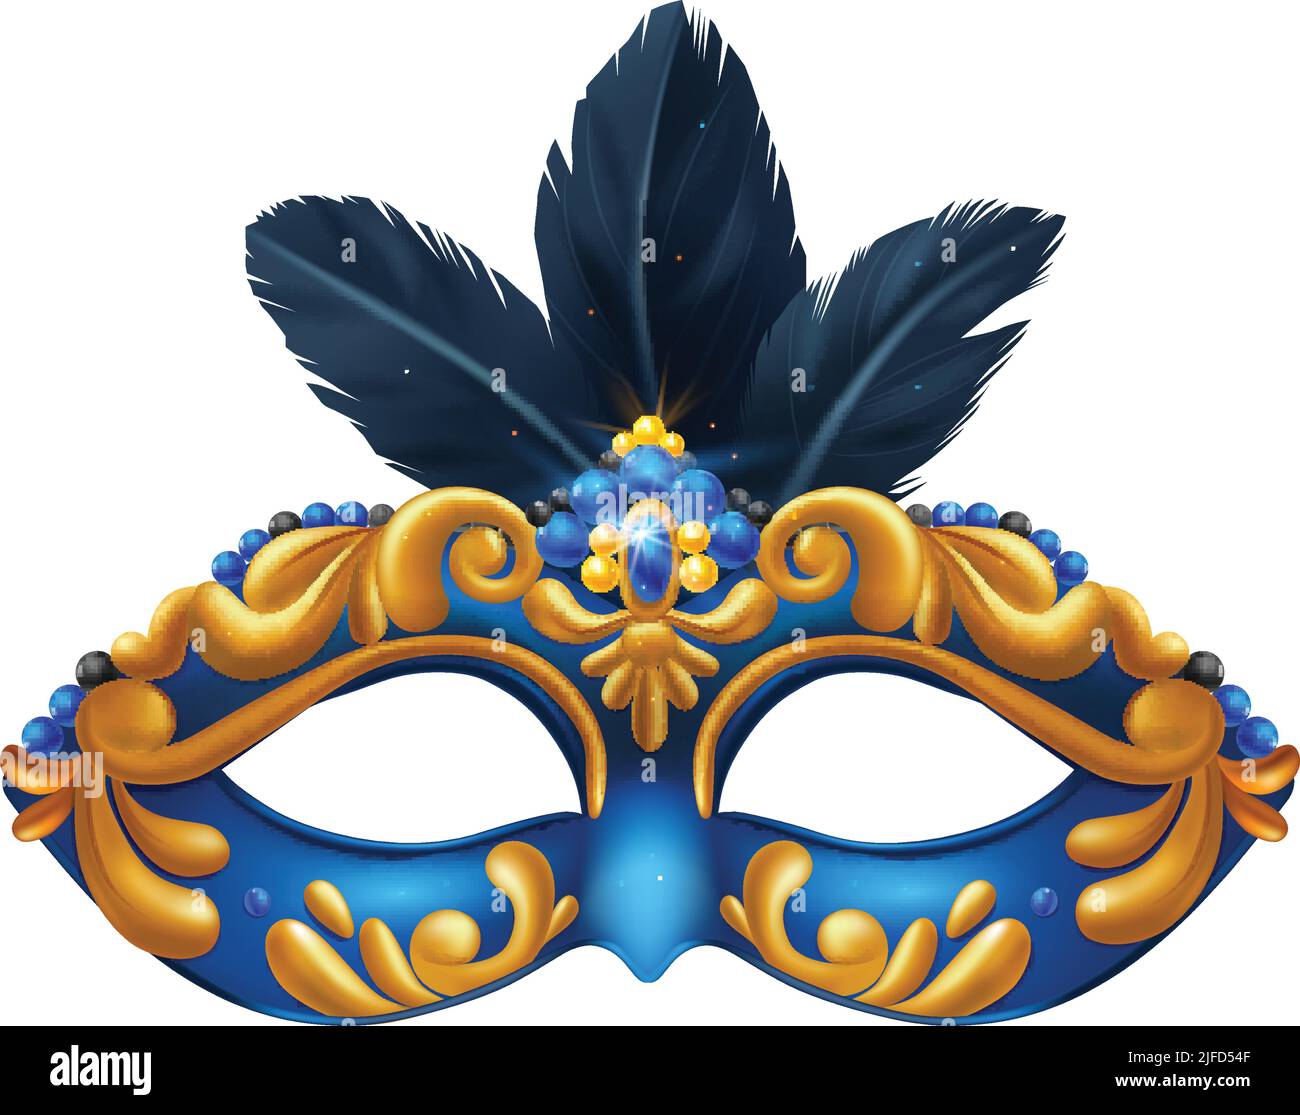 Realistic carvinal mask composition with isolated image of masquerade mask with blue and yellow pattern vector illustration Stock Vector